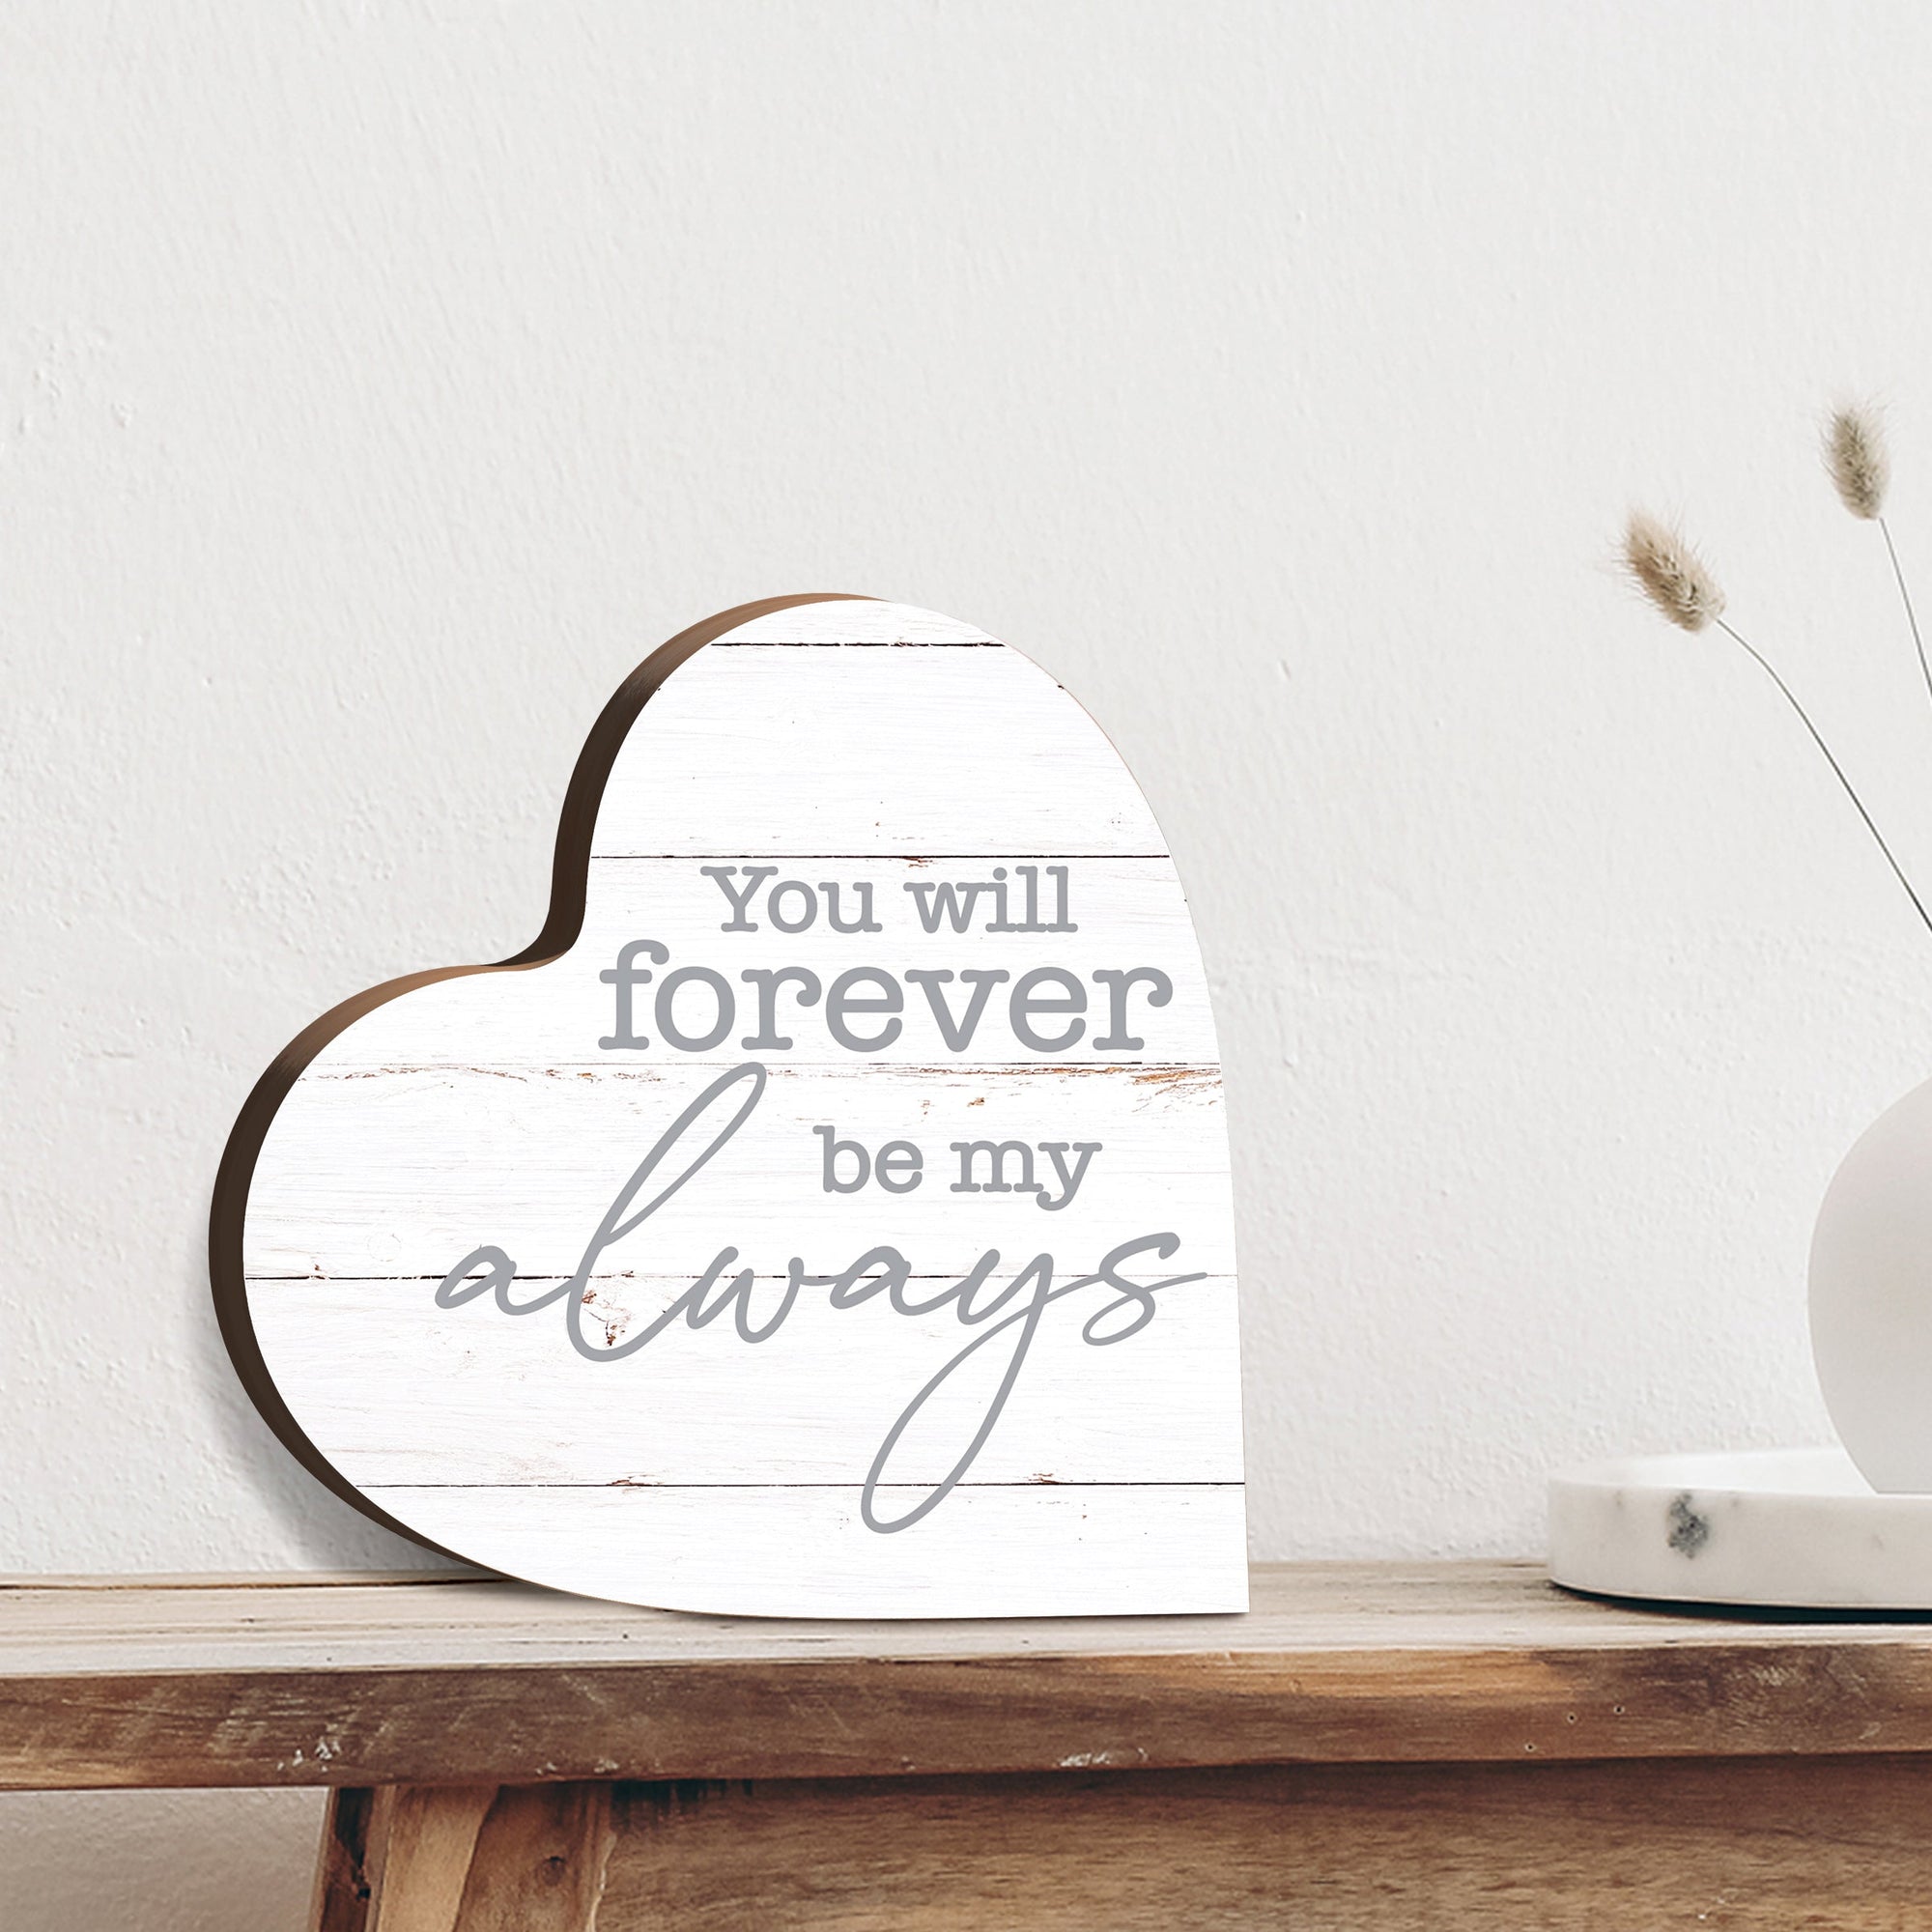 Elevate your space with an inspirational tabletop decoration - Heart block décor gift.